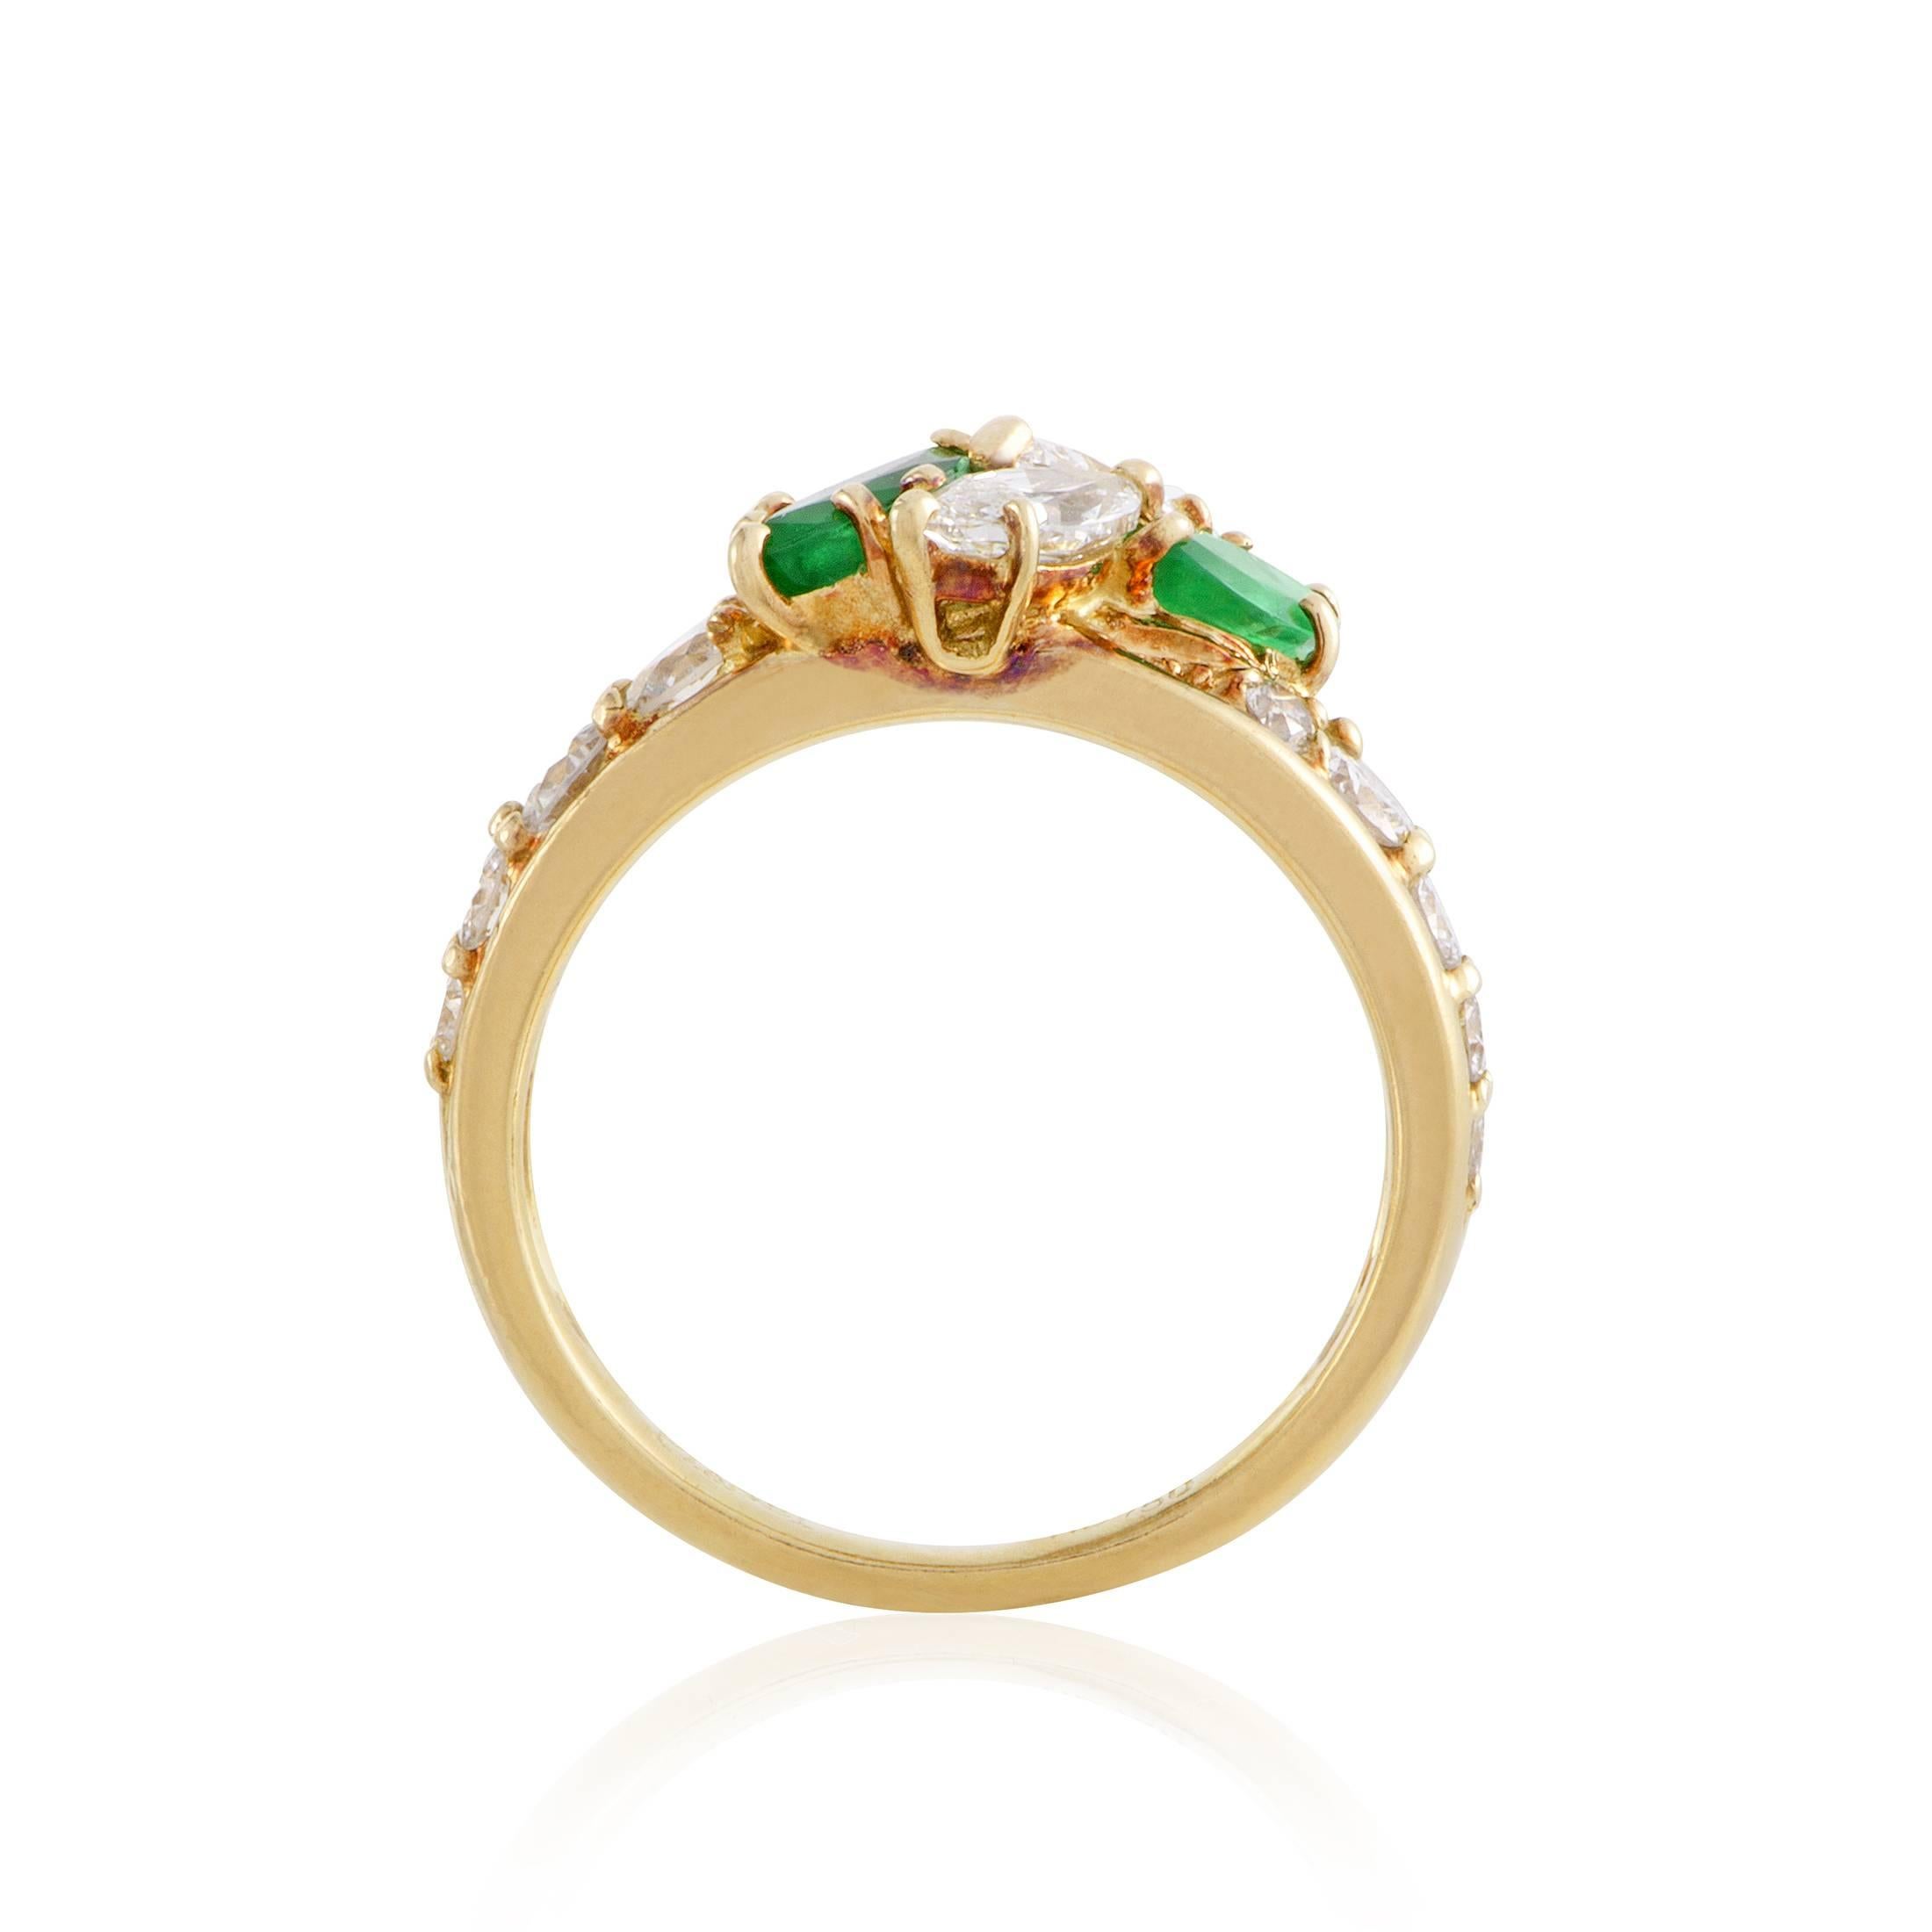 Providing exceptional contrast against the warm nuance of 18K yellow gold and adding appealing color to the lustrous arrangement of diamonds totaling approximately 1.75 carats, the nifty emeralds weigh in total 0.75ct in this remarkable ring from